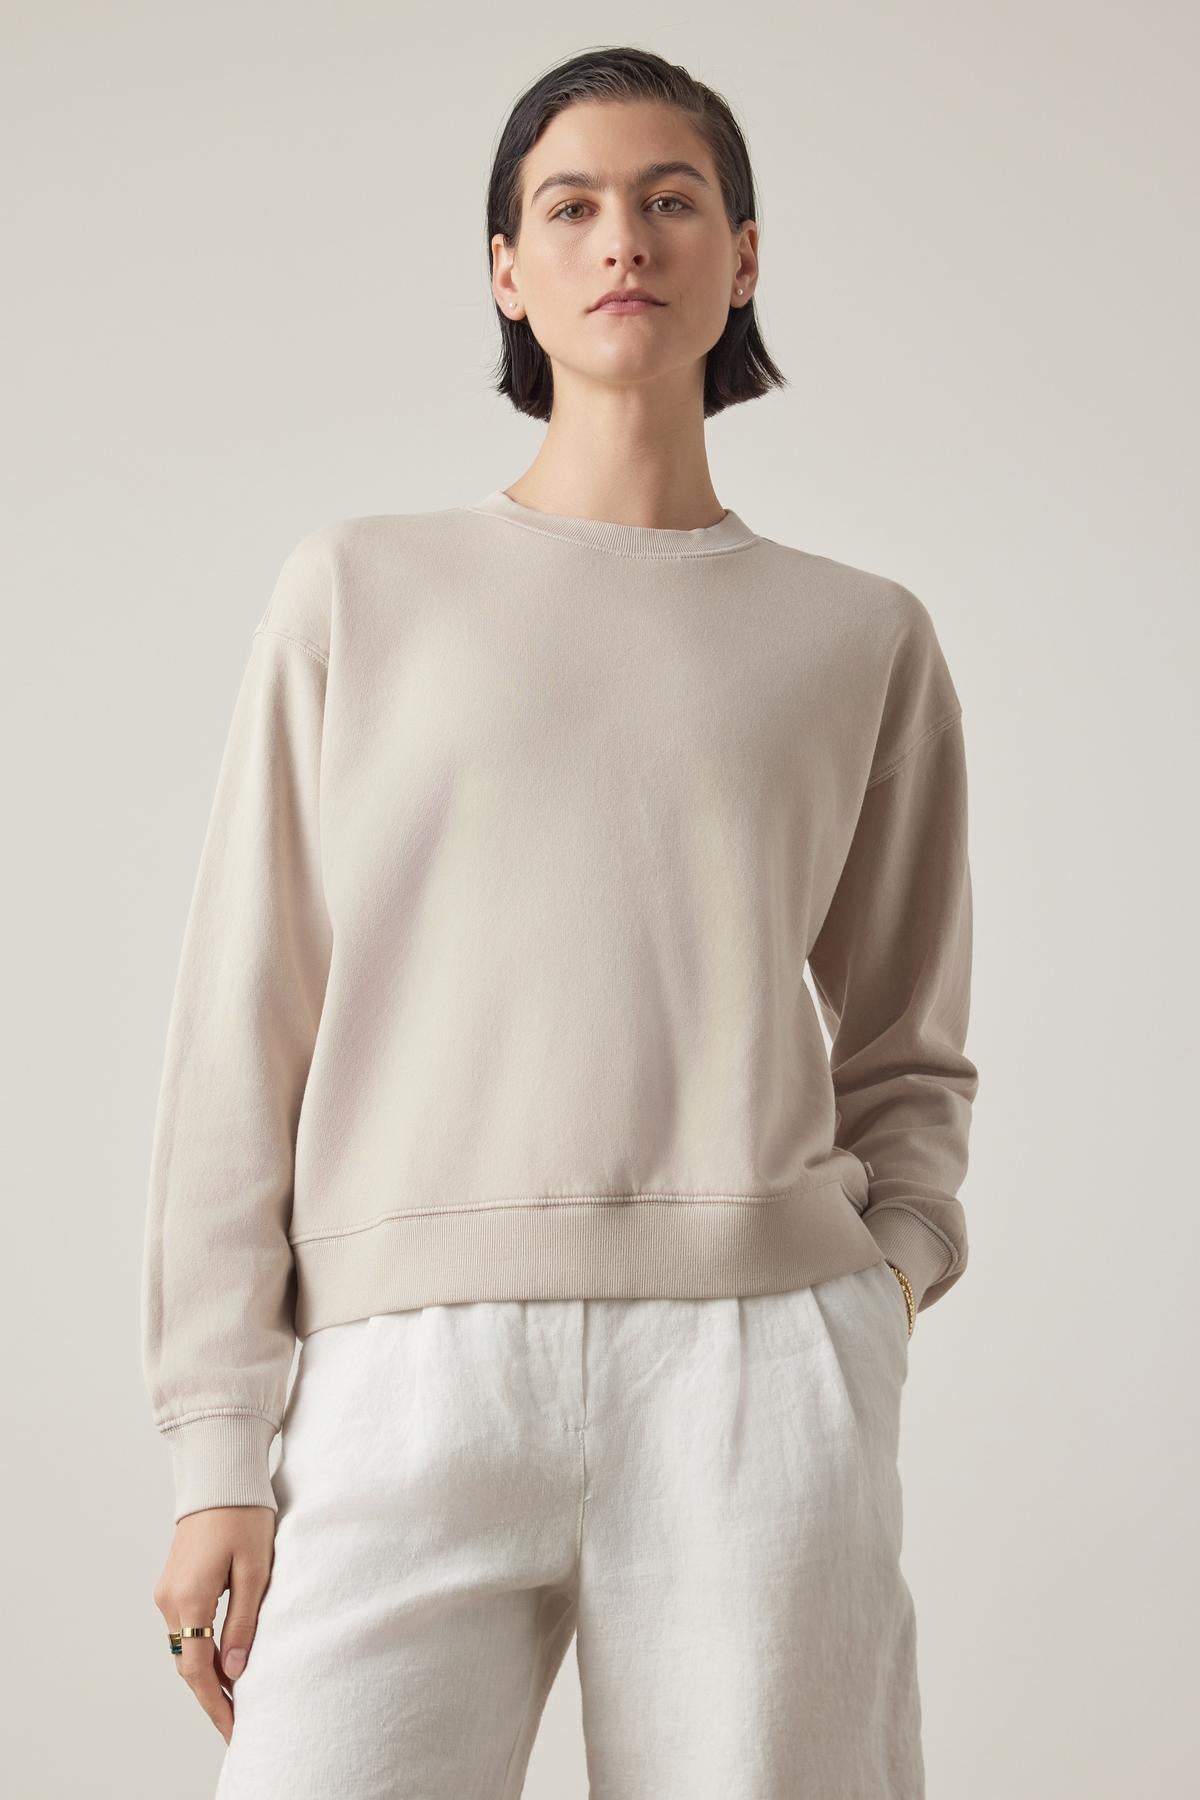   Woman in a Velvet by Jenny Graham Ynez Sweatshirt and white pants standing against a plain background, looking directly at the camera. 